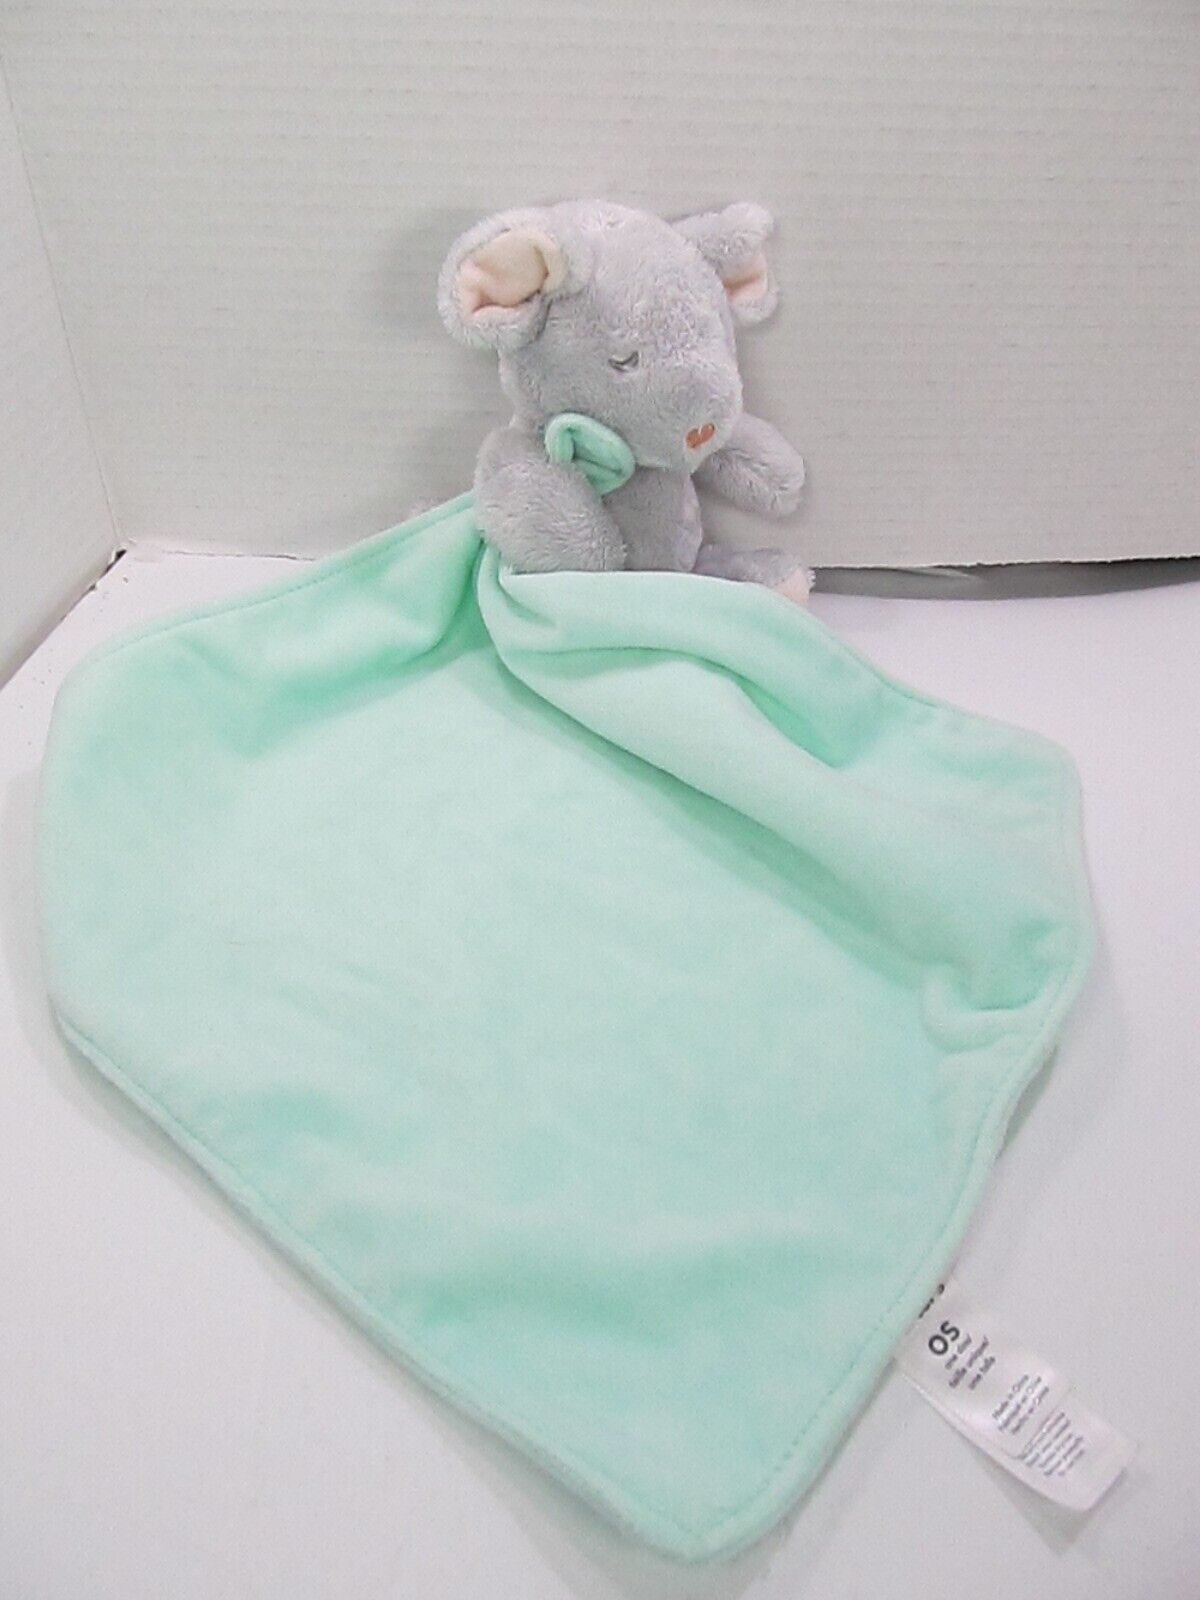 Carters Lovey Mouse Plush Rattle Child of Mine Nursery  Green Security Blanket - $14.03